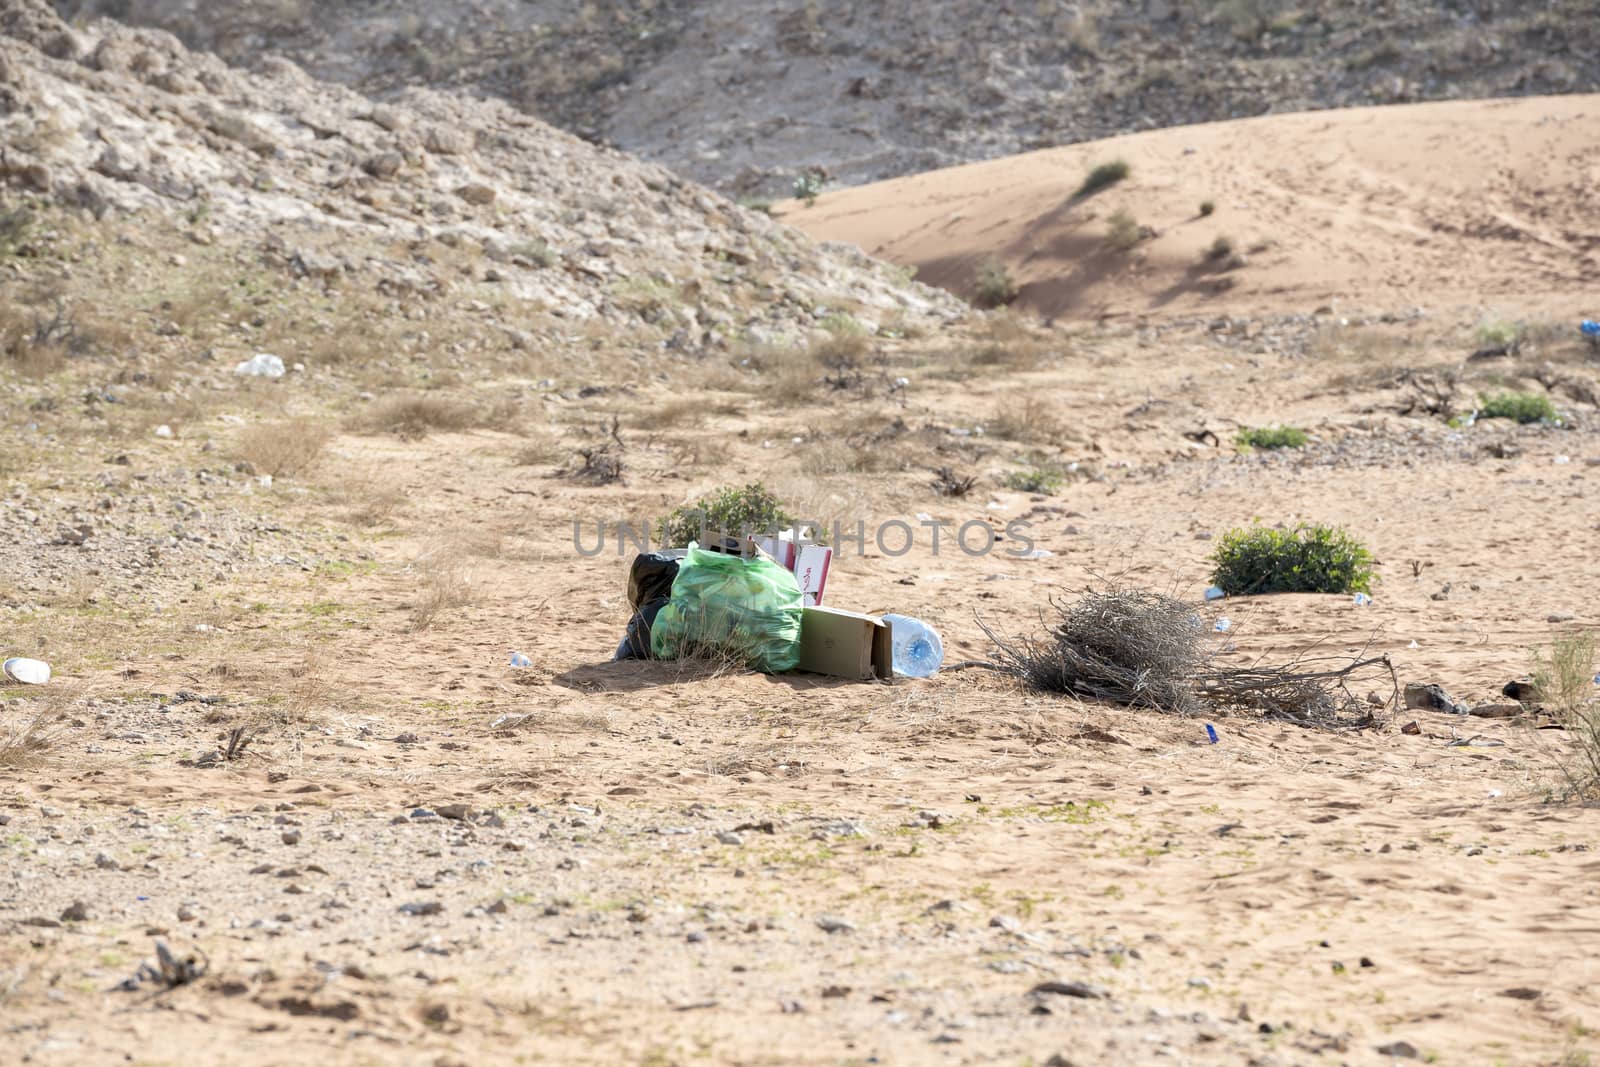 Garbage left in Desert (plastic bag, plastic bottles, cartoons and other detritus). Plastic pollution and environmental issue